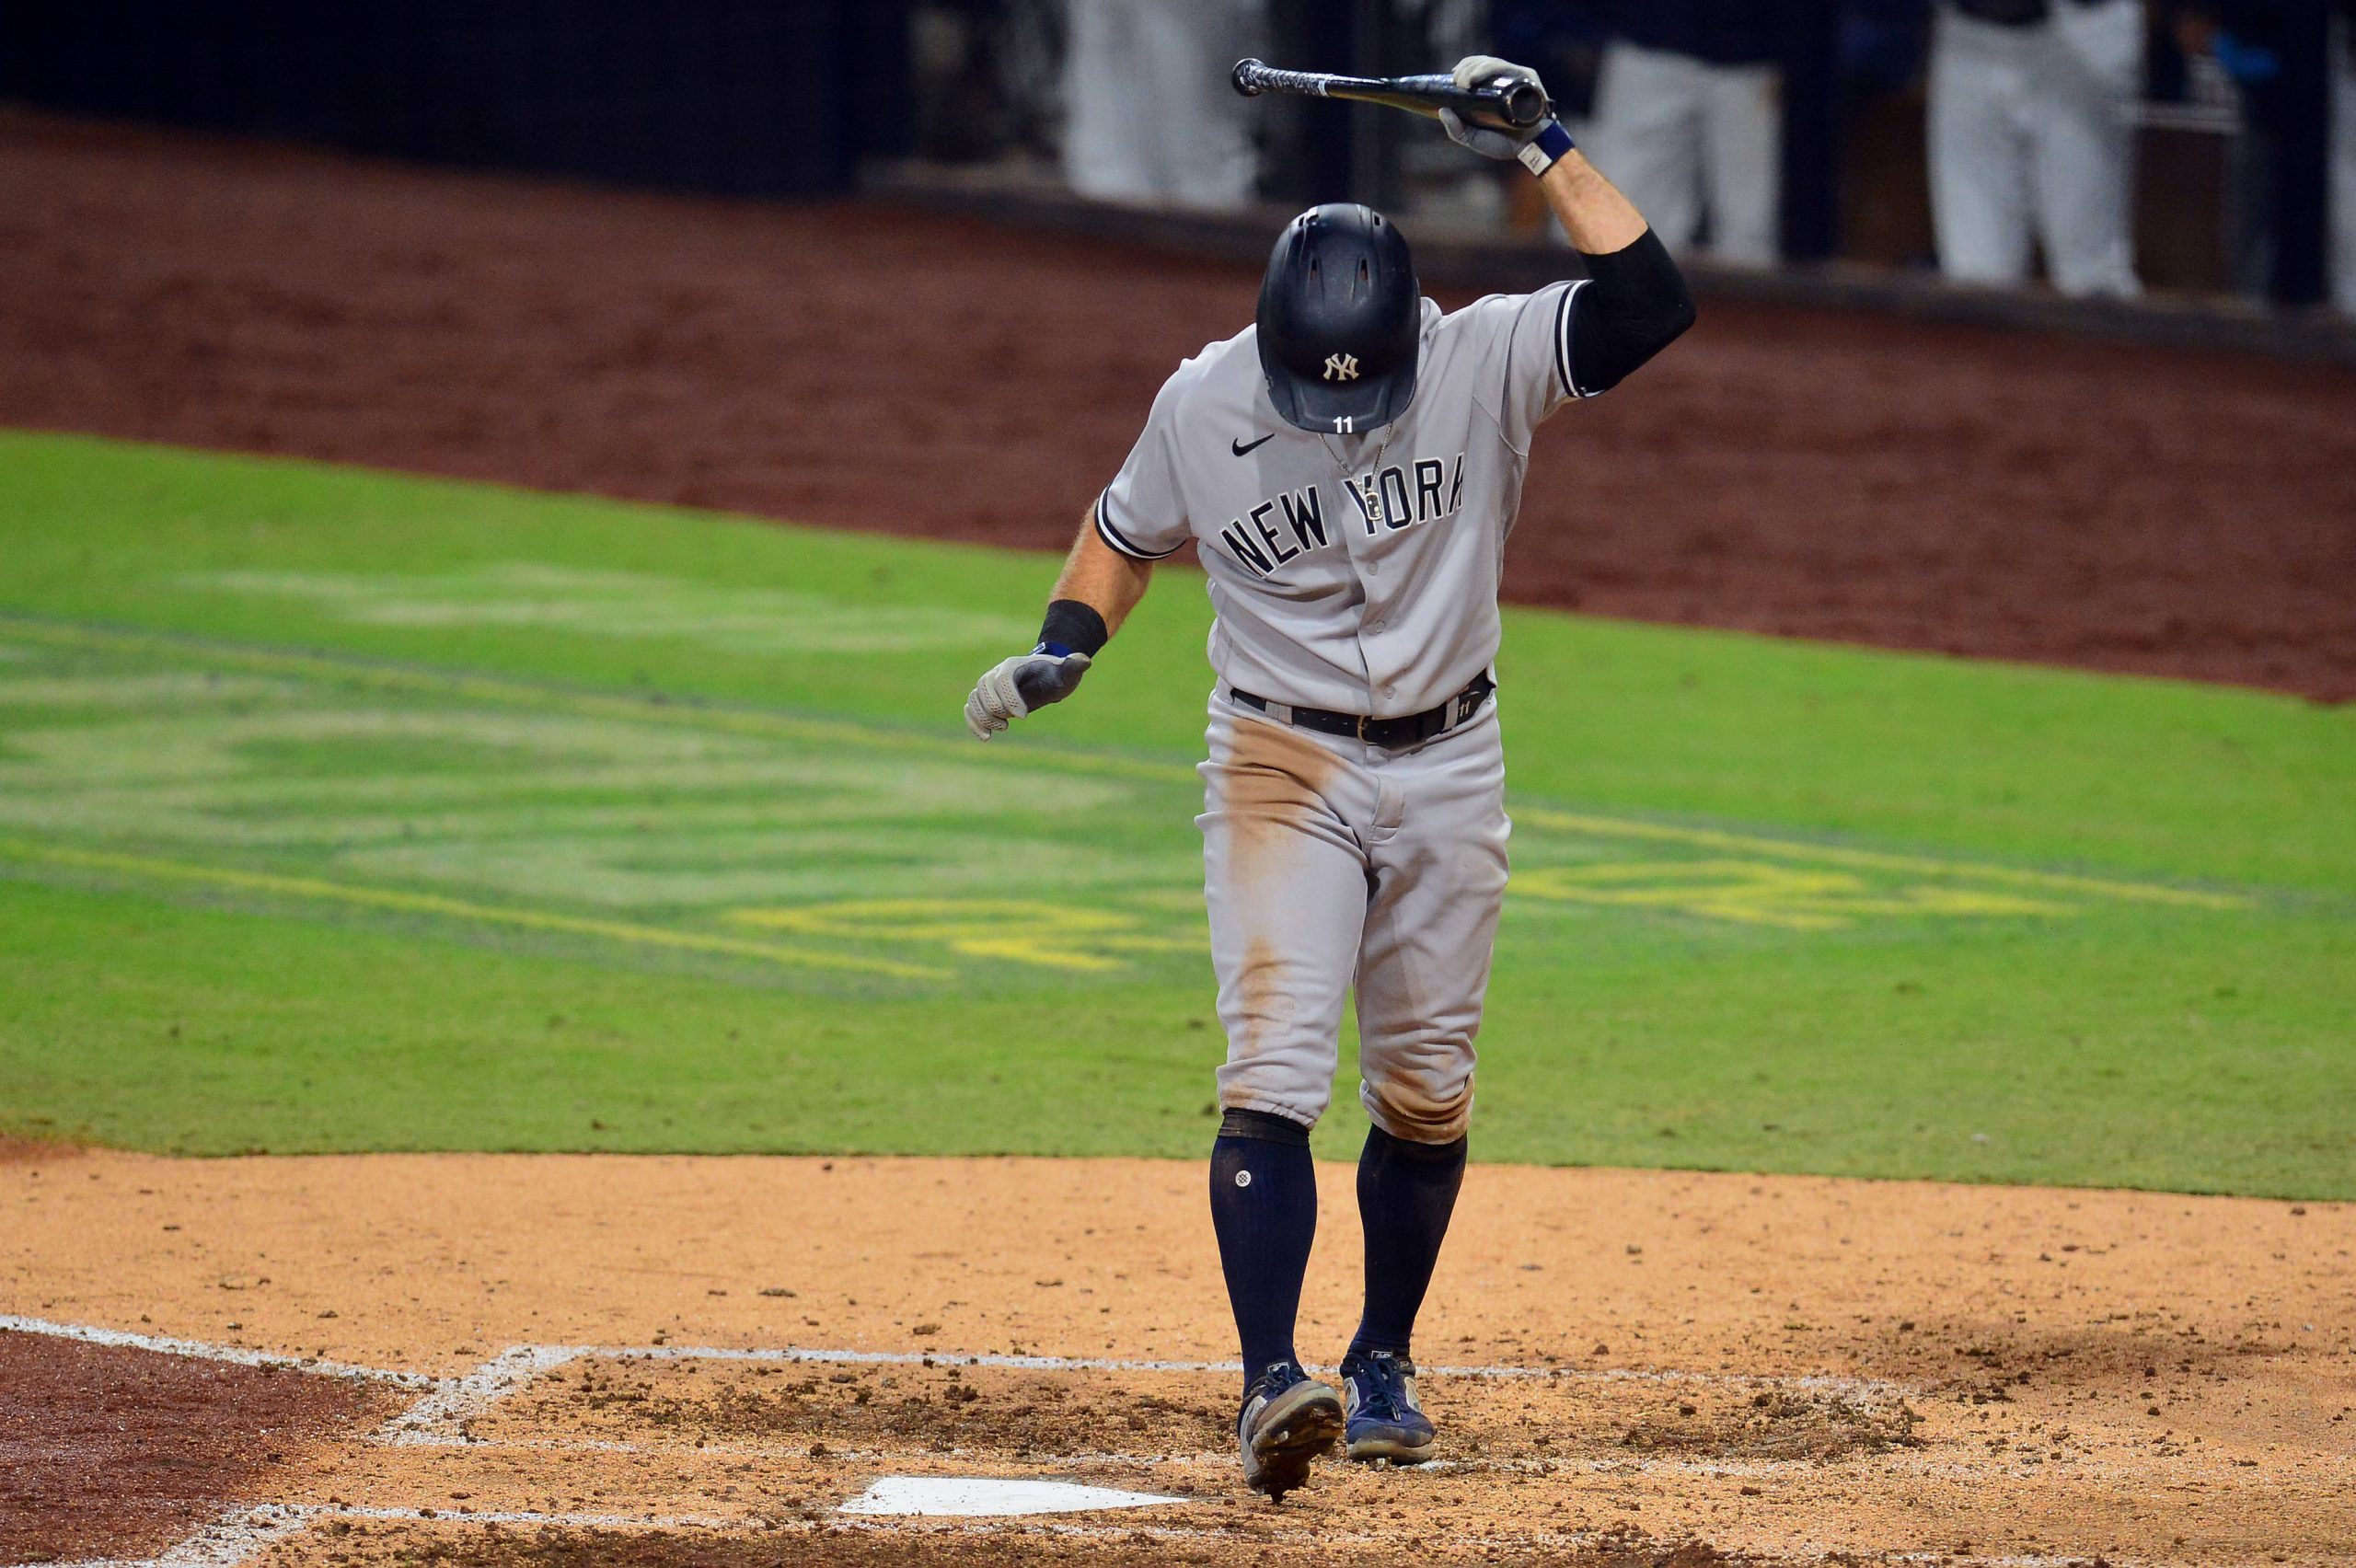 Rays use four outfielders vs Yankees in ALDS